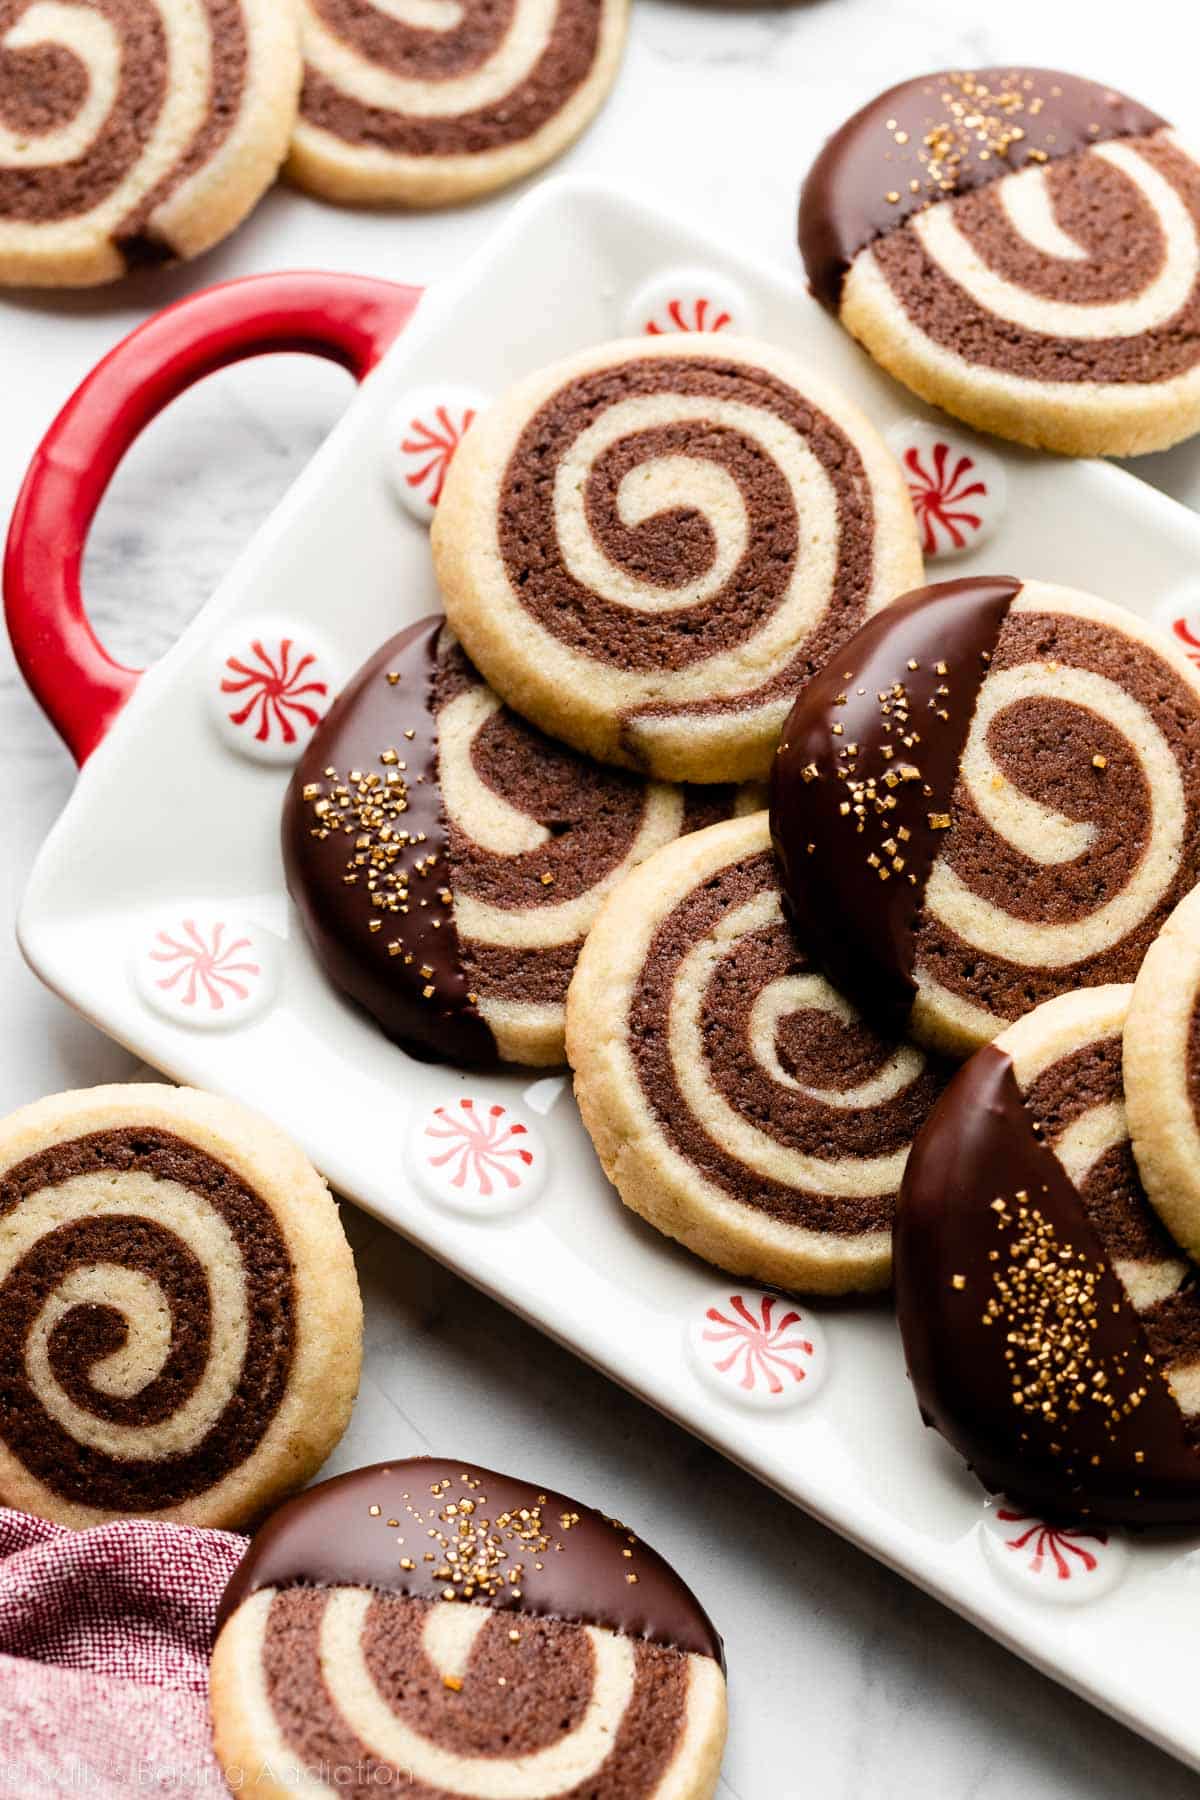 pinwheel cookies arranged on white plate with peppermint swirls around the edges.